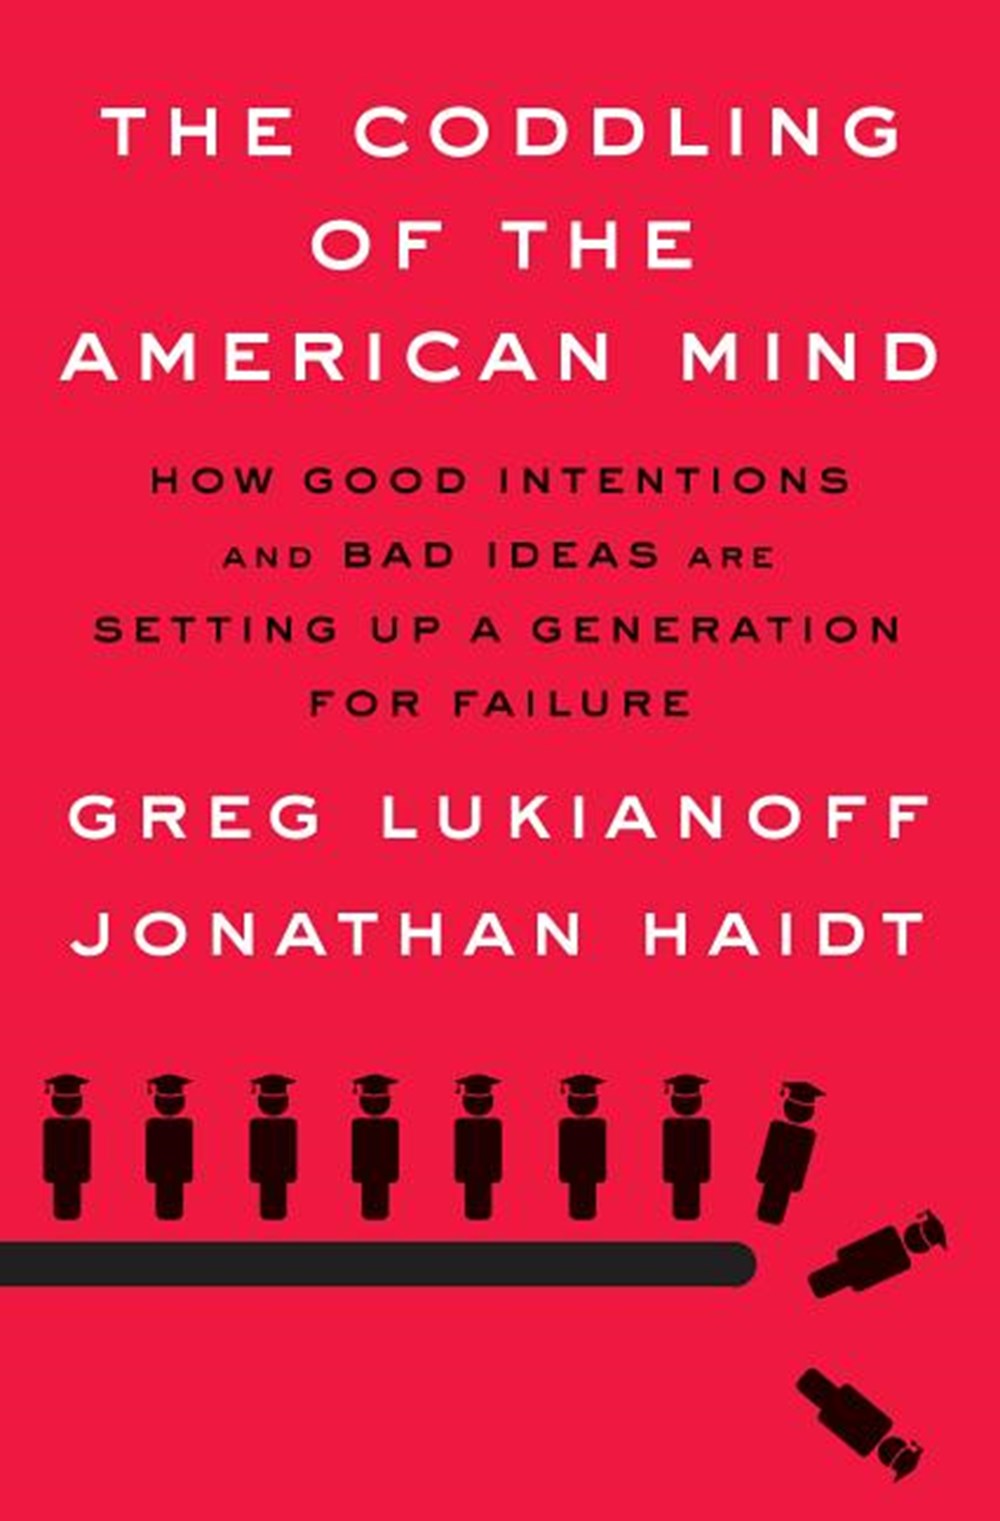 Coddling of the American Mind How Good Intentions and Bad Ideas Are Setting Up a Generation for Fail